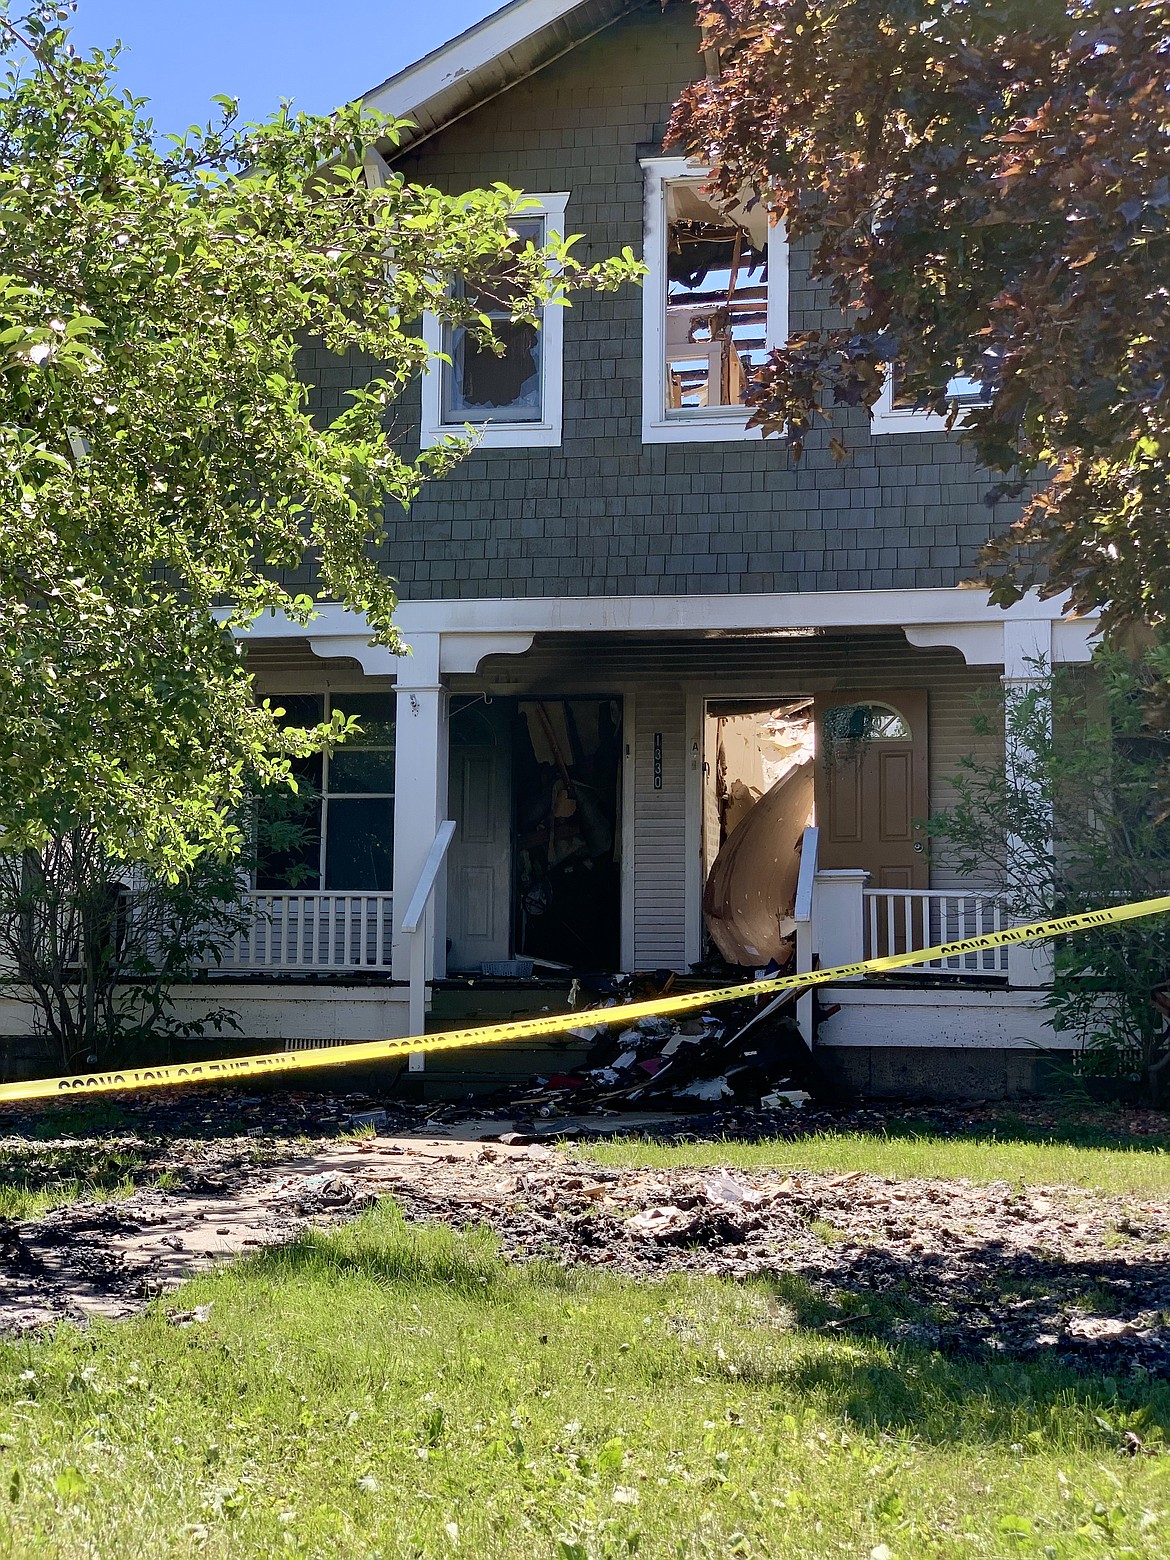 A blaze destroyed a multi-residential home on Second Street West in
Kalispell Saturday night. Kalispell Fire Department firefighters continued to monitor the scene through Sunday, June 2. (Hilary Matheson/Daily Inter Lake)